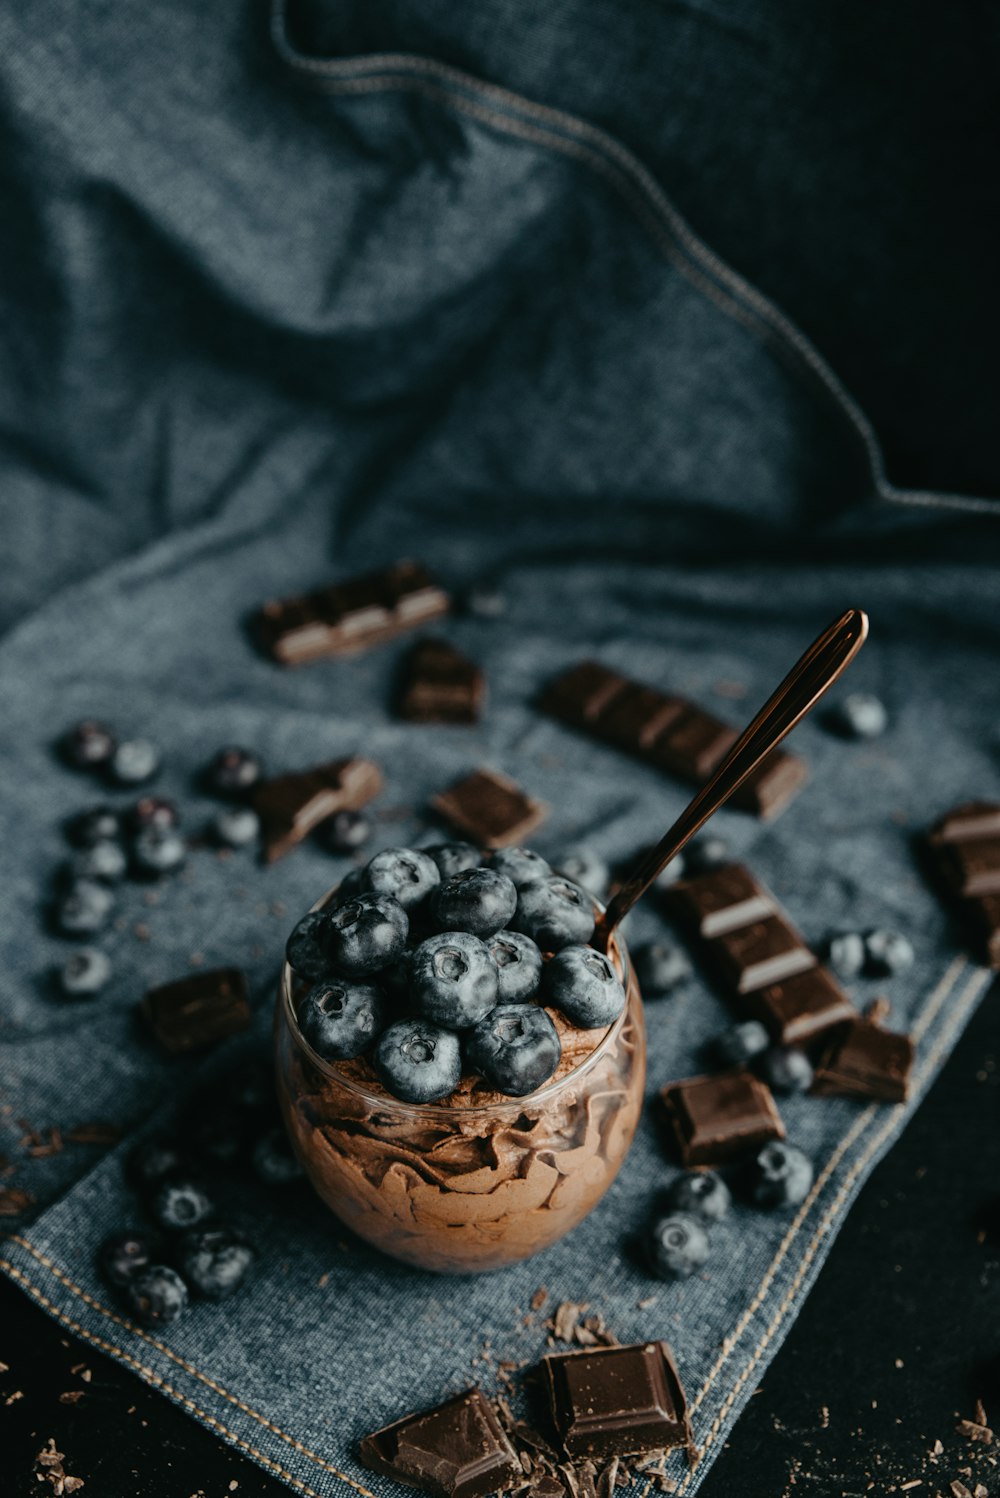 a bowl of blueberries and chocolate on a cloth